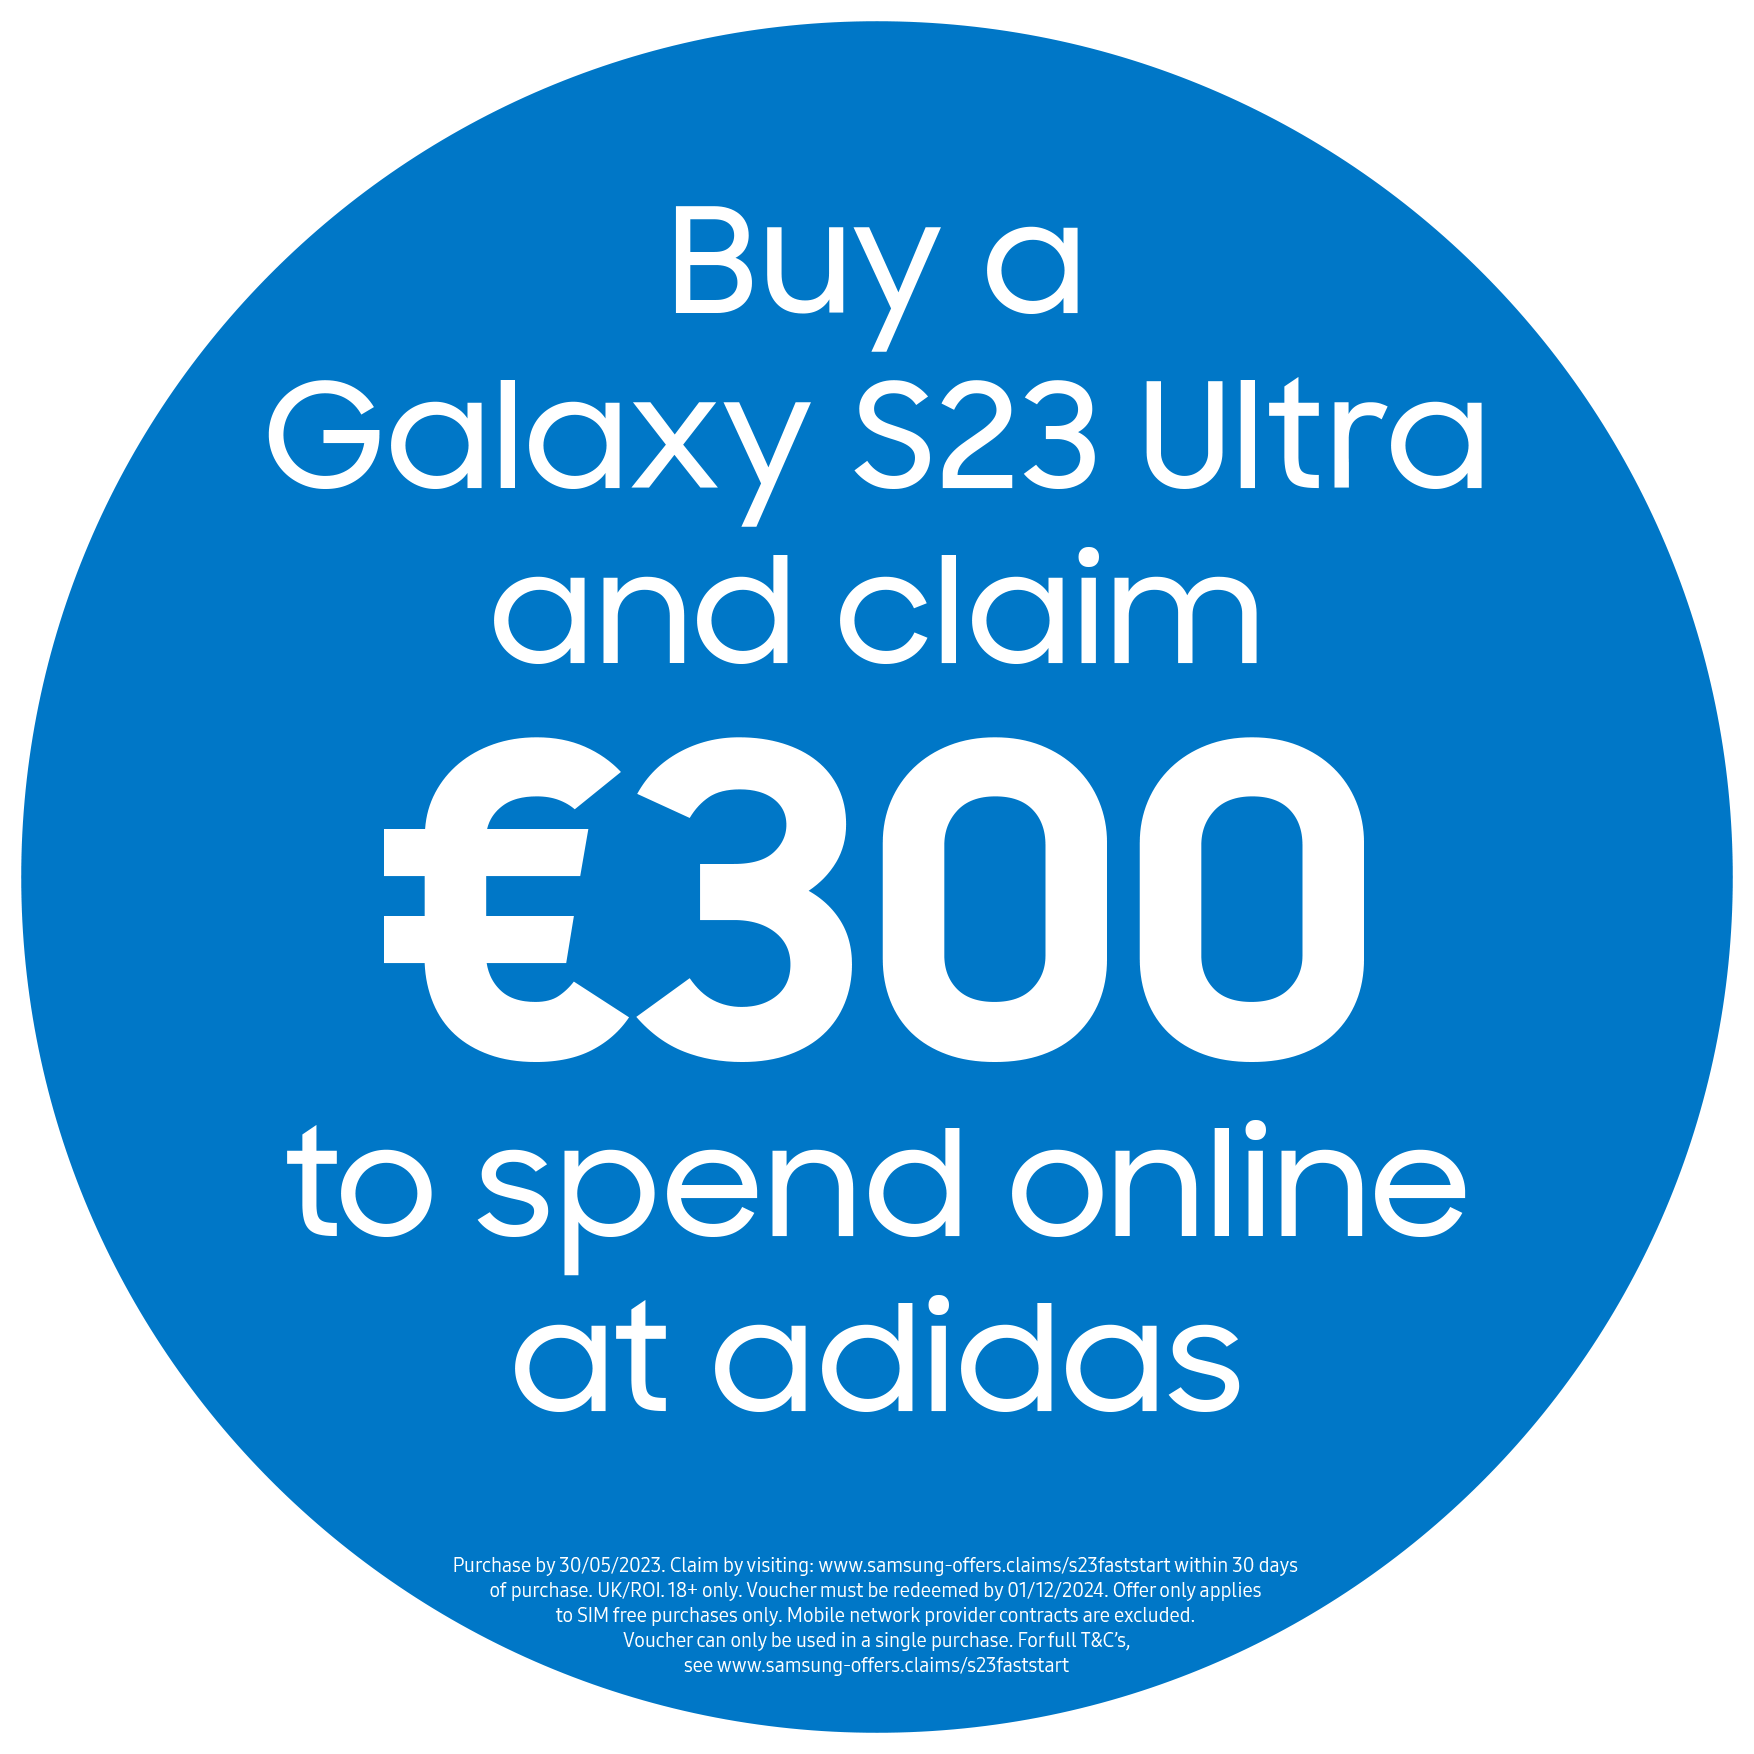 Claim an adidas voucher worth €300 when you buy the S23, S23+ or S23 Ultra. Offer ends 30/05/2023.